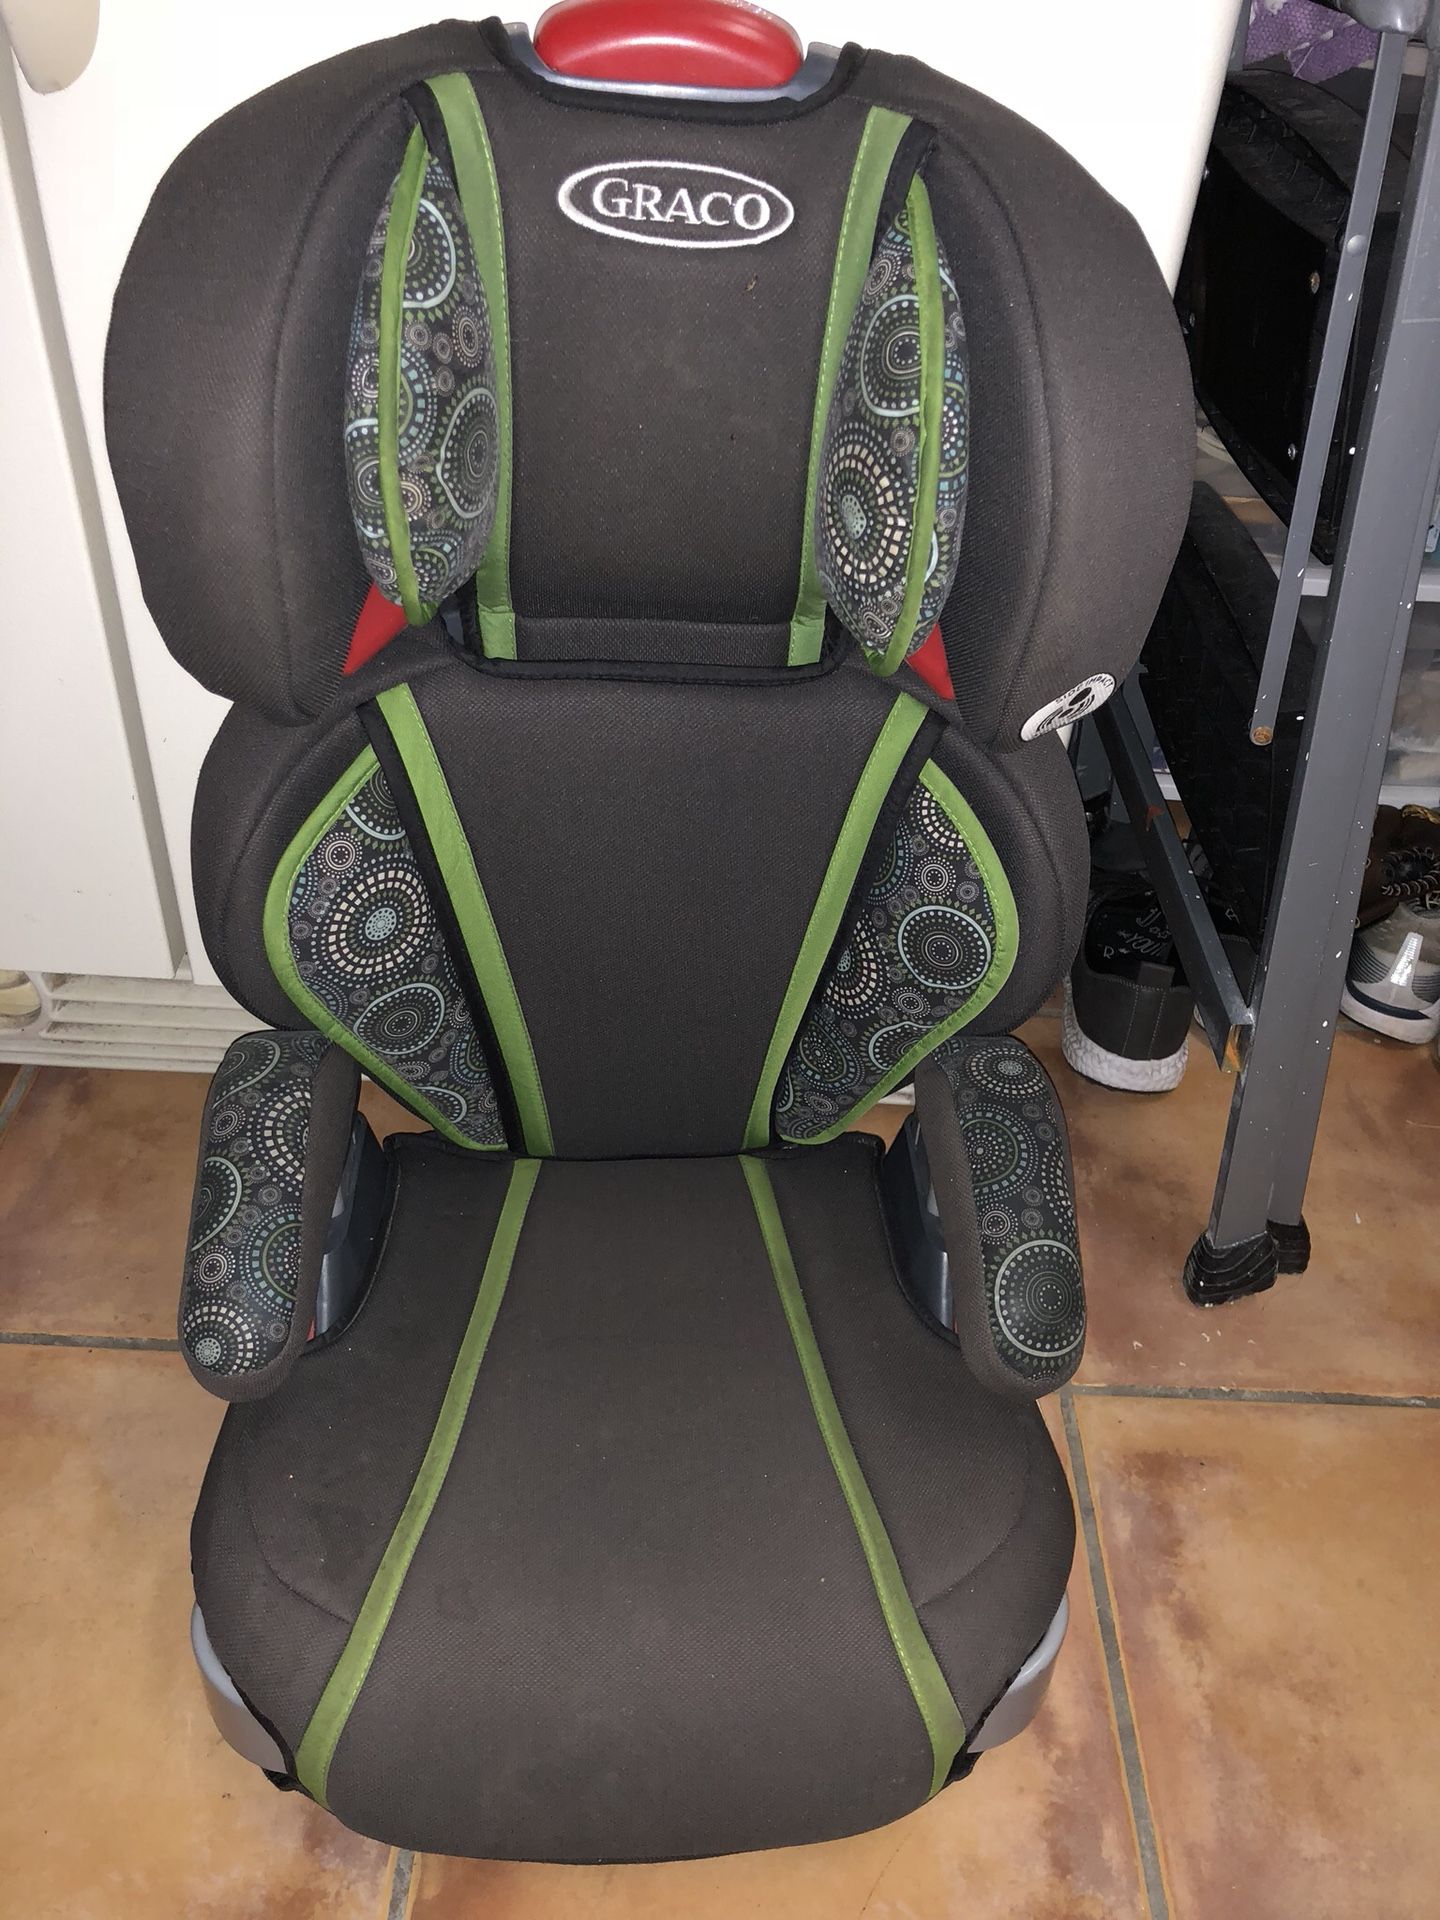 Child Seat, booster seat